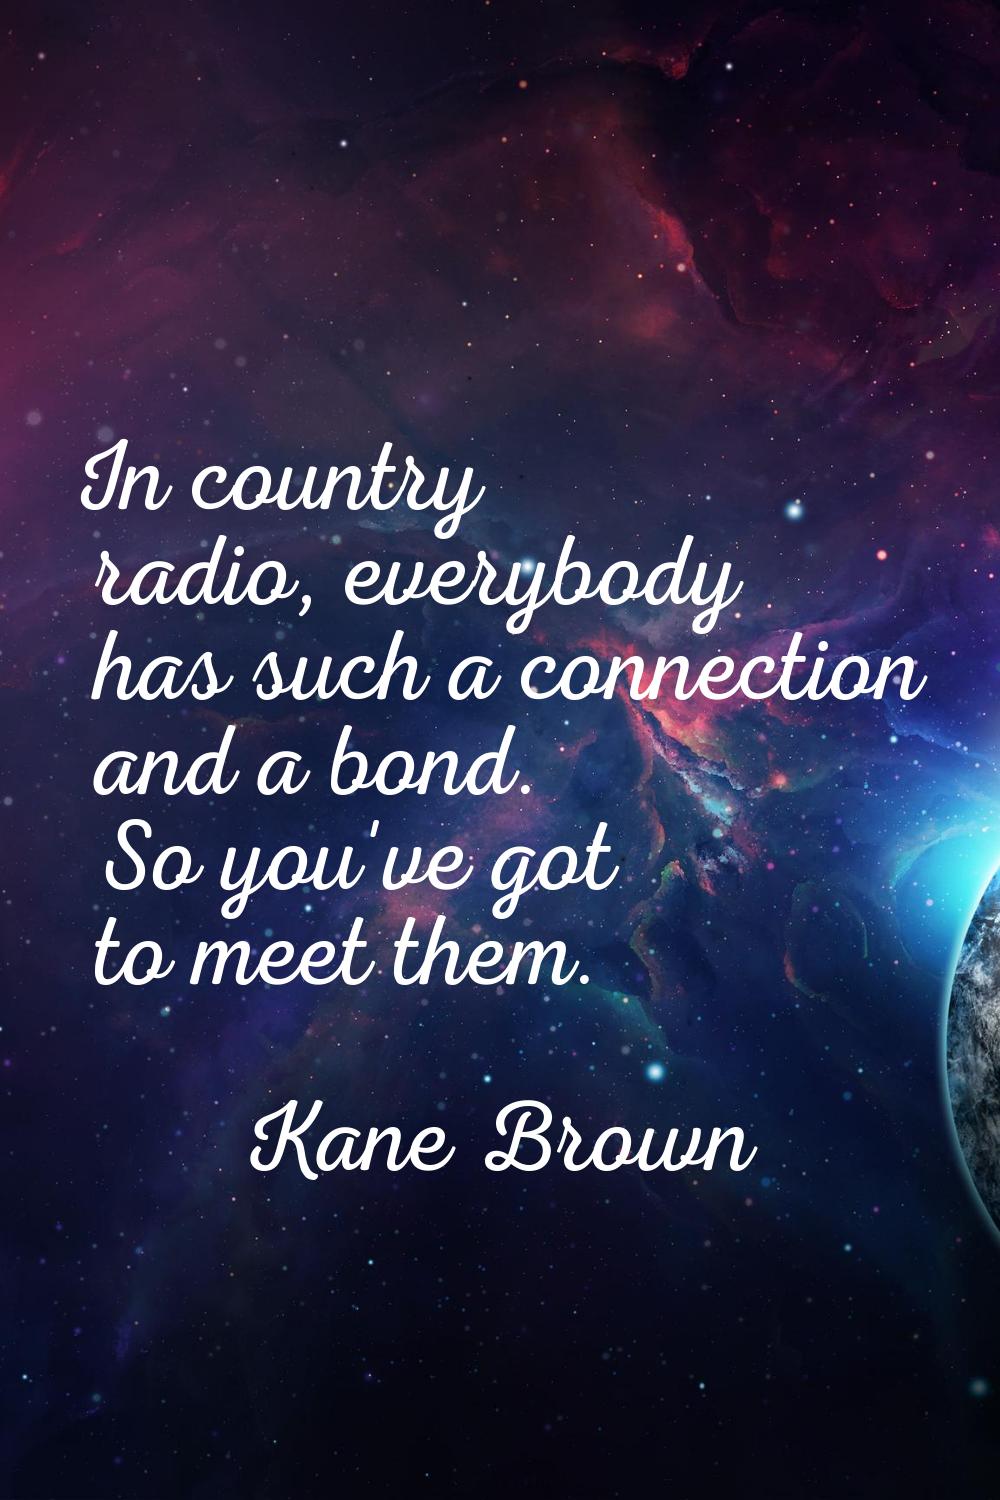 In country radio, everybody has such a connection and a bond. So you've got to meet them.